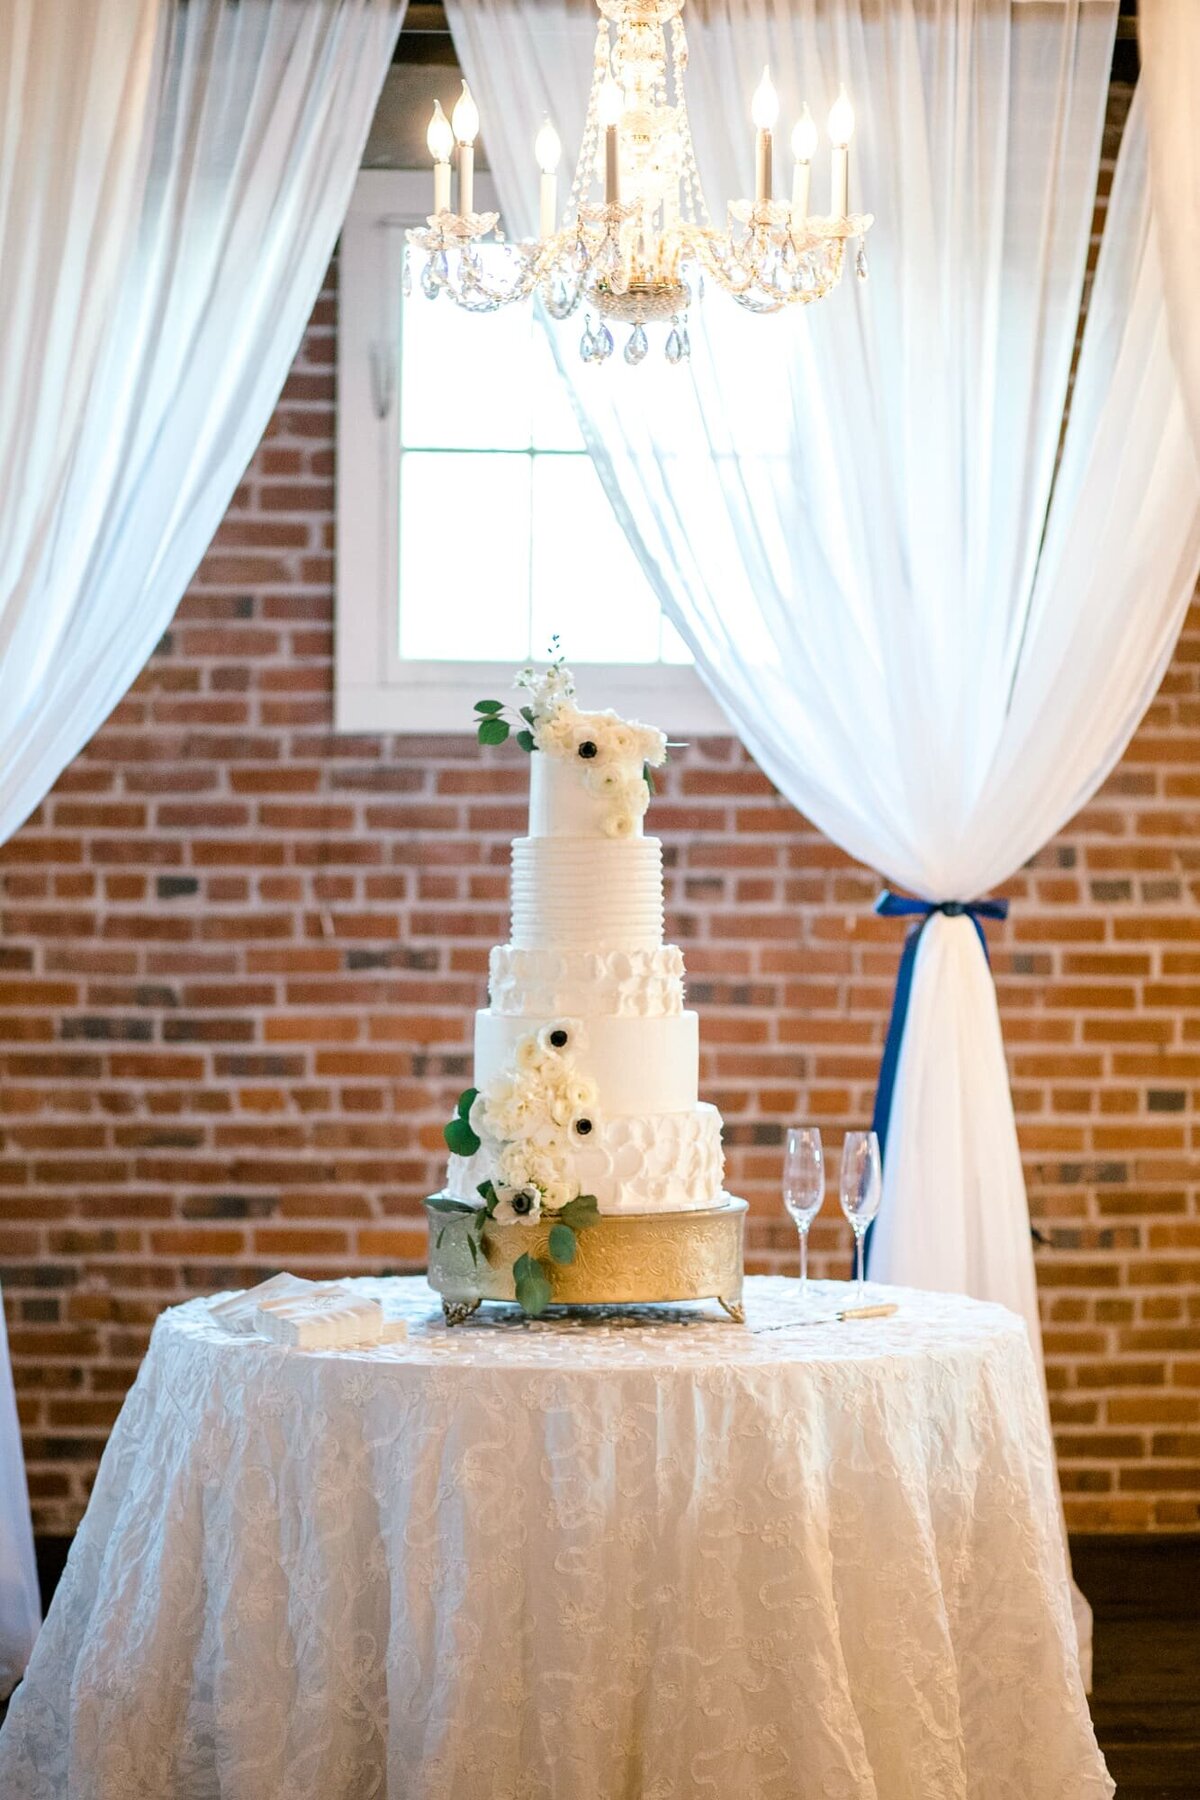 Tall white wedding cake in front of brick wall